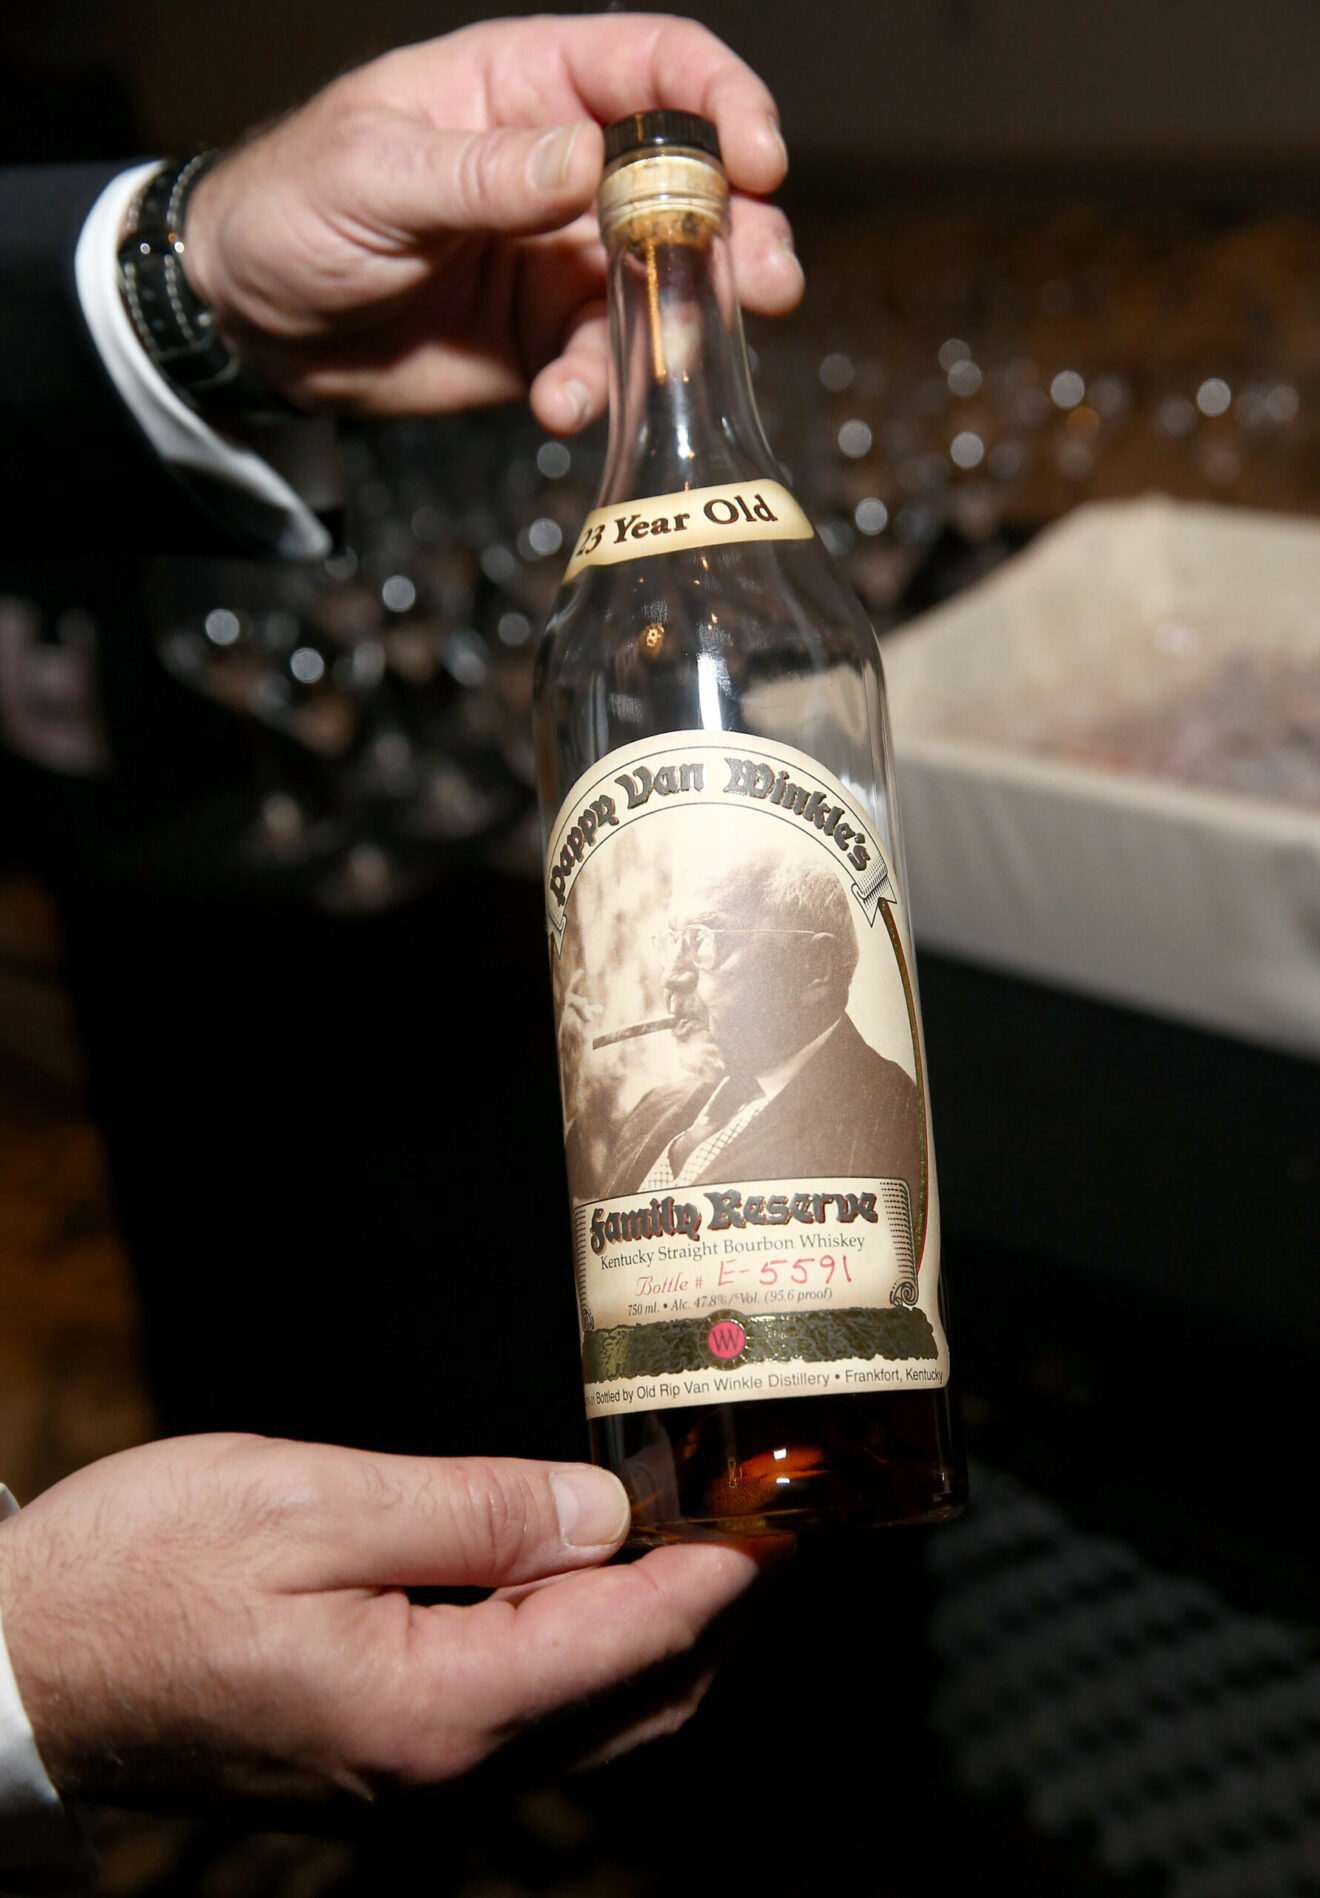 How ultra-rare, premium spirits are cultivating mass followings